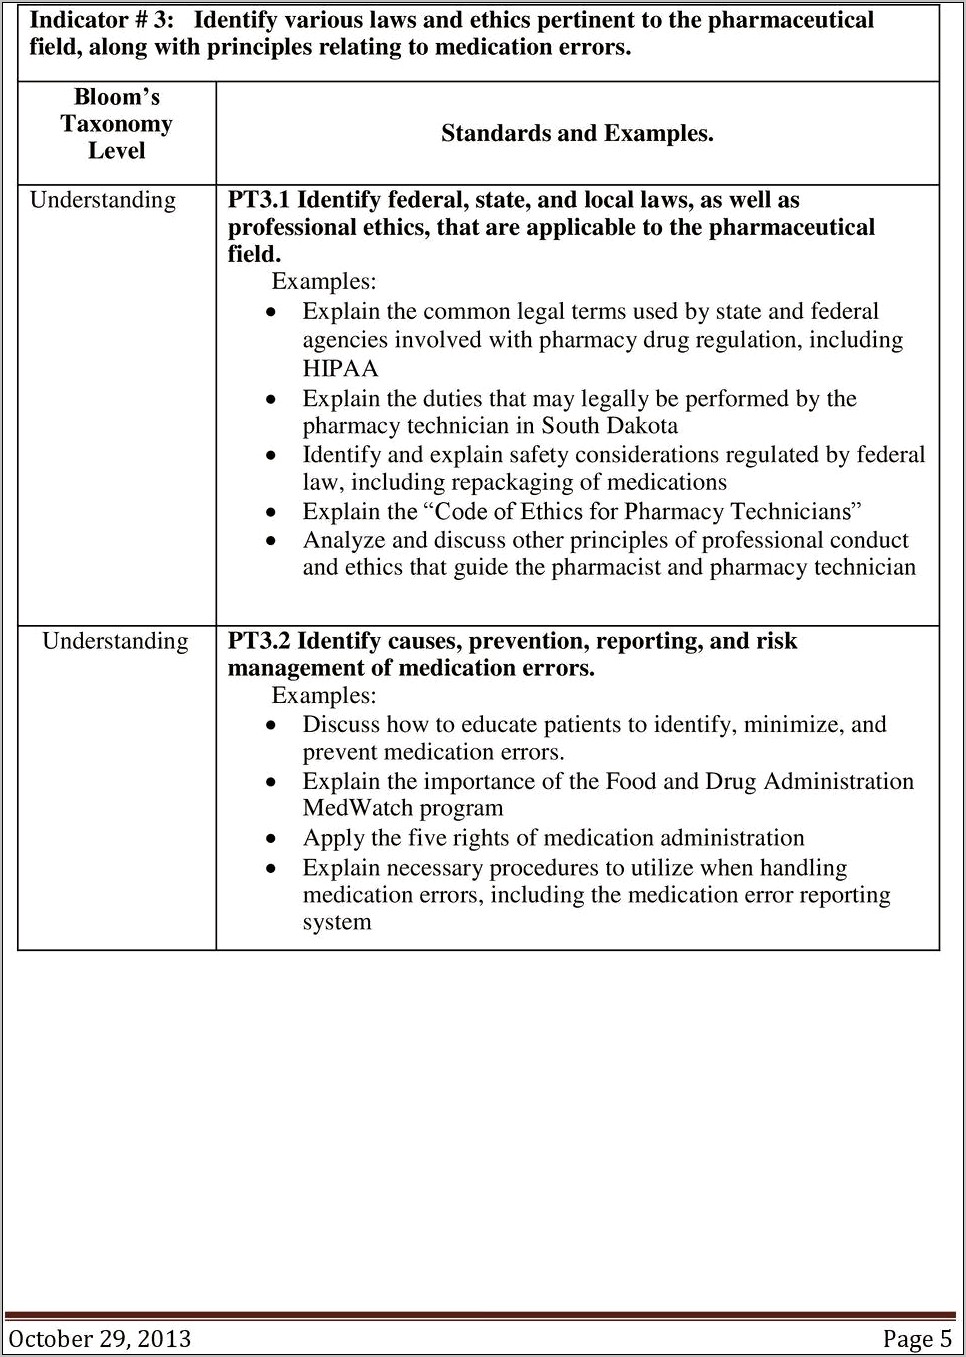 Resume Objective For Repackaging Medications For Pharmacy Technician